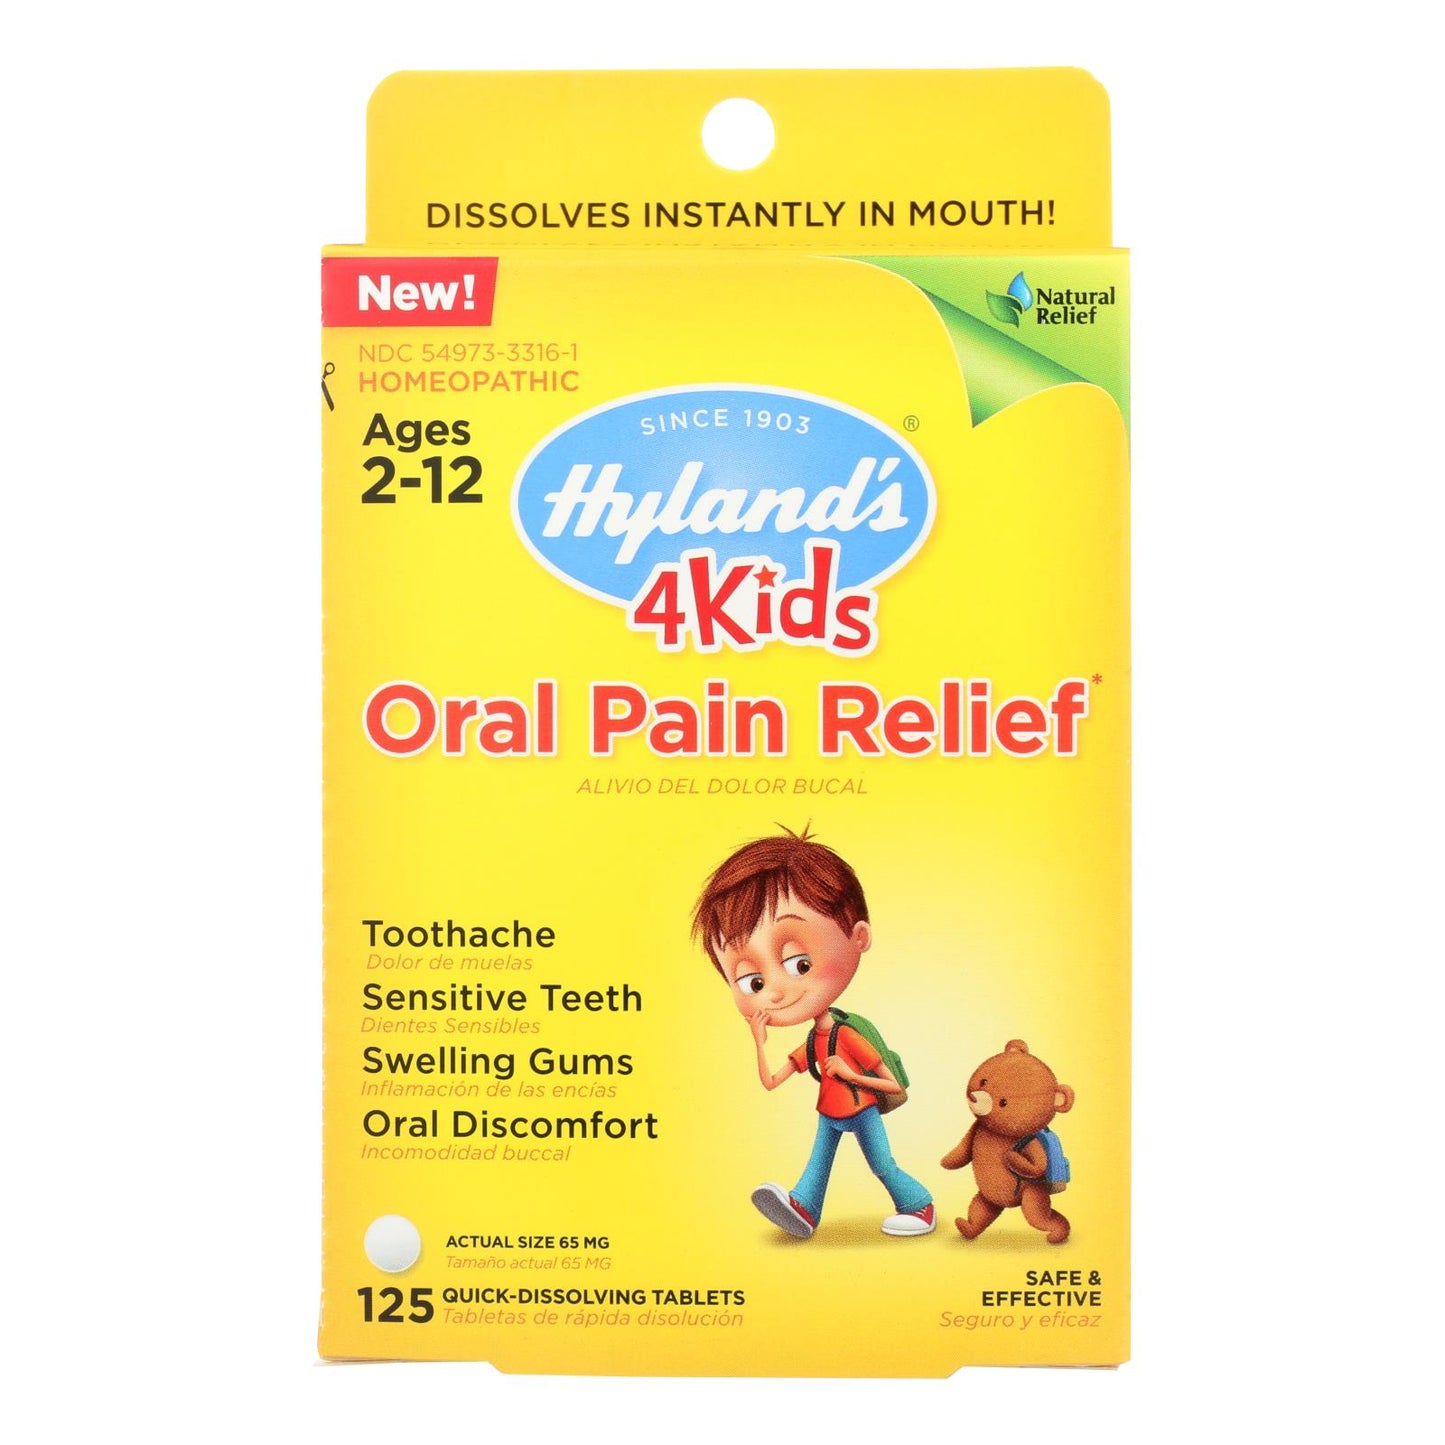 Hylands Homeopathic - 4kids Pain Relf Oral - 1 Each - 125 Tab